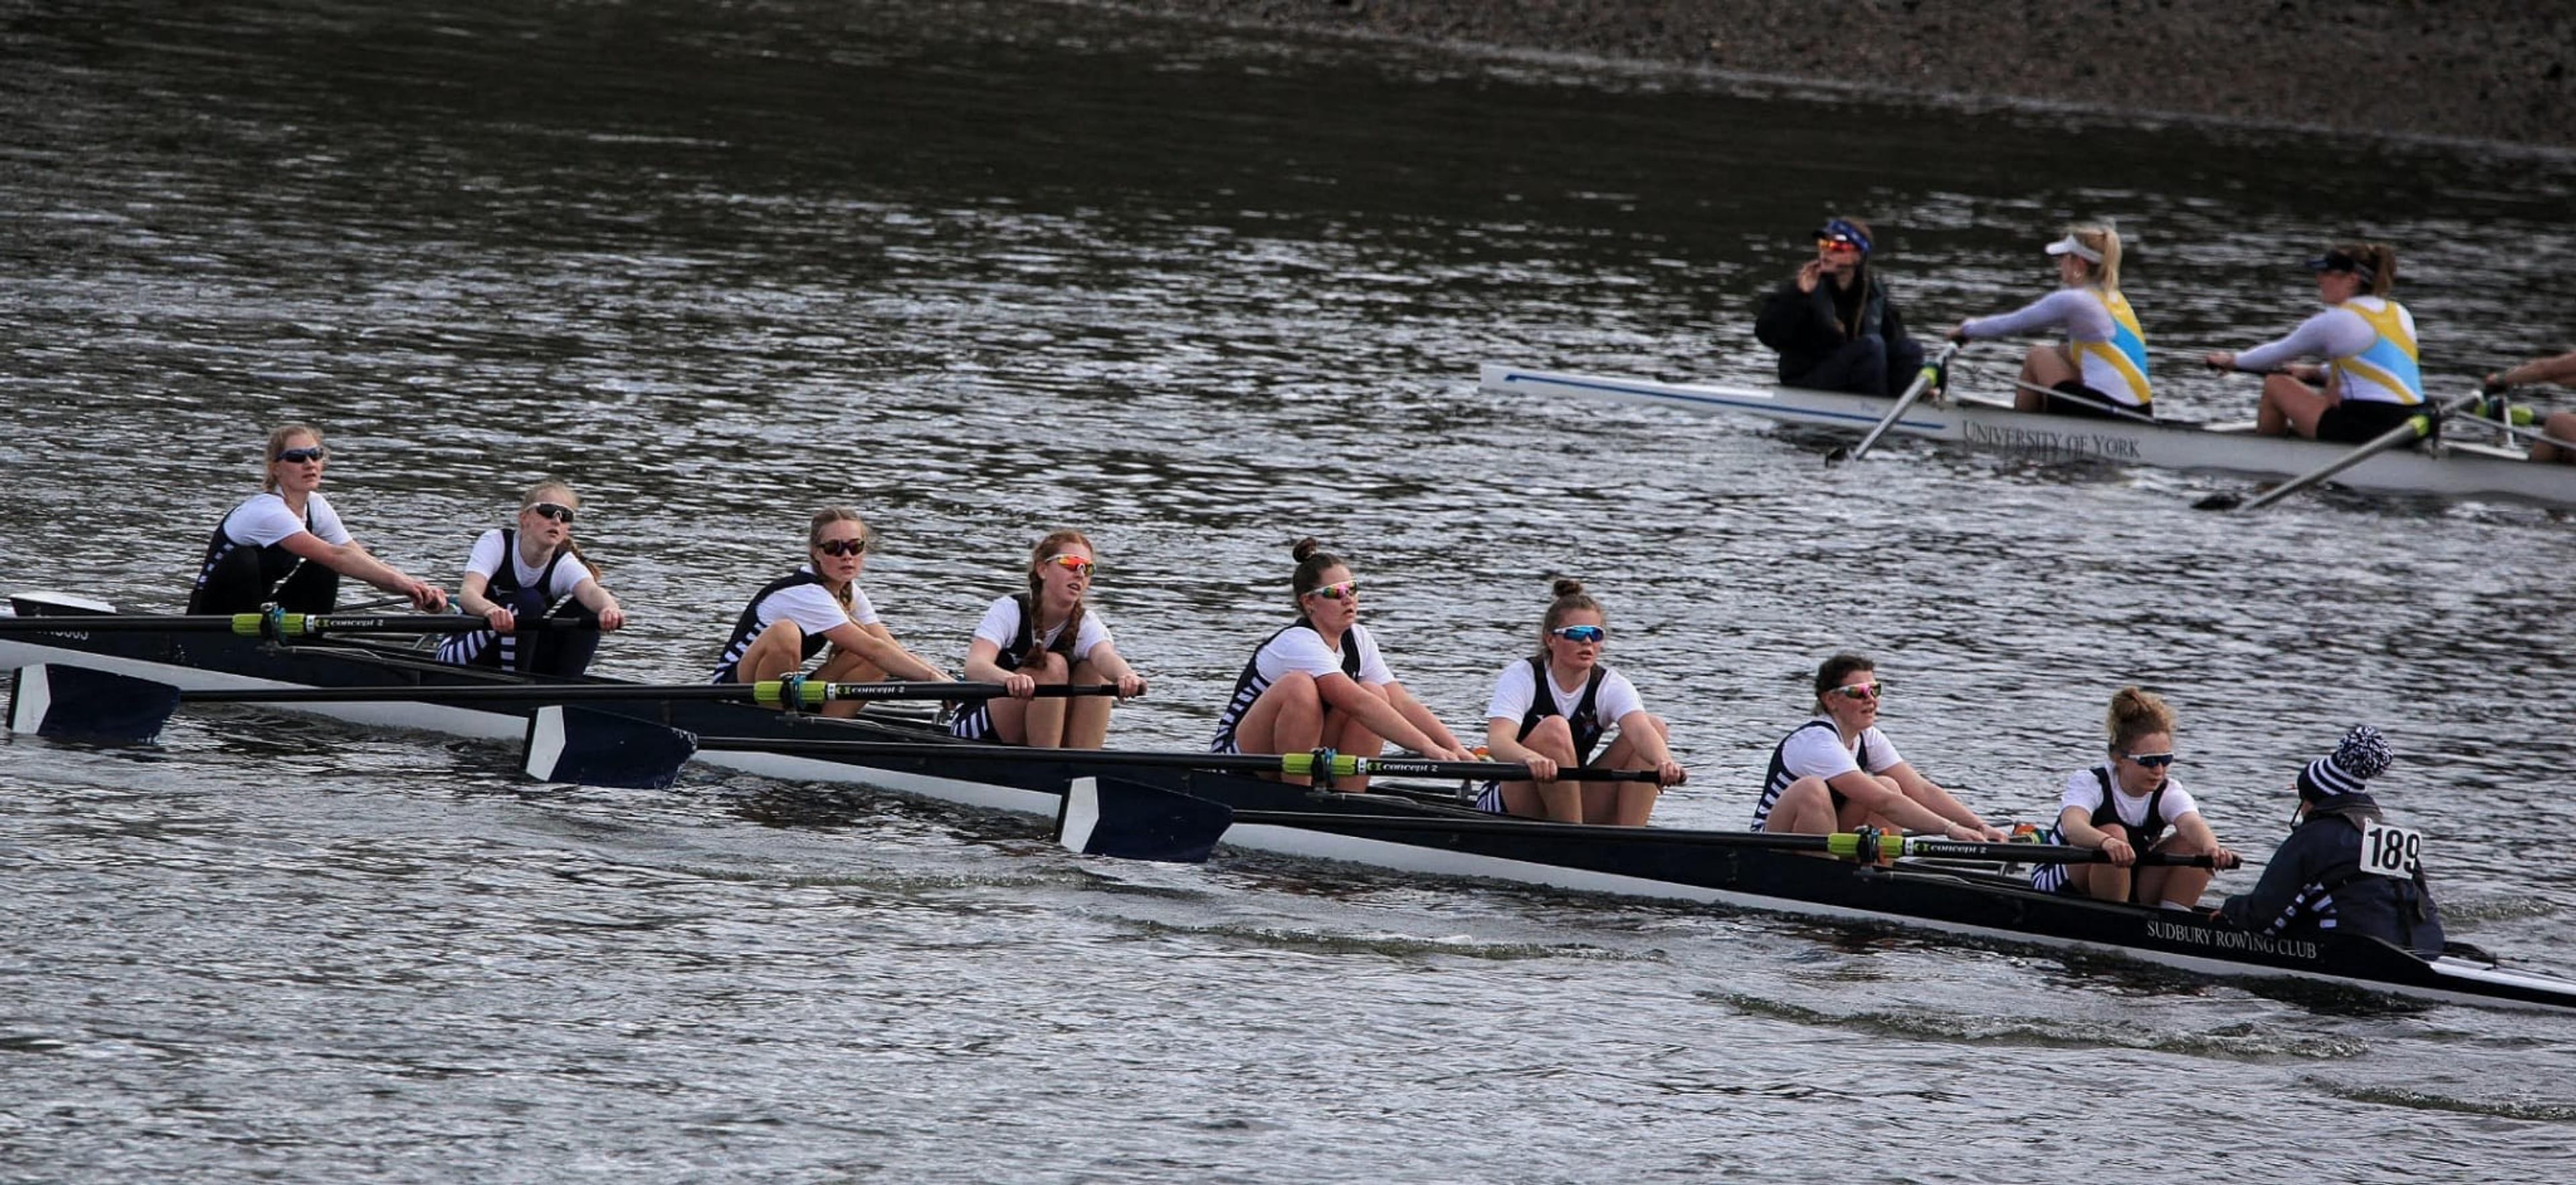 Mid-race on the tideway, neck and neck with a University of York boat. 